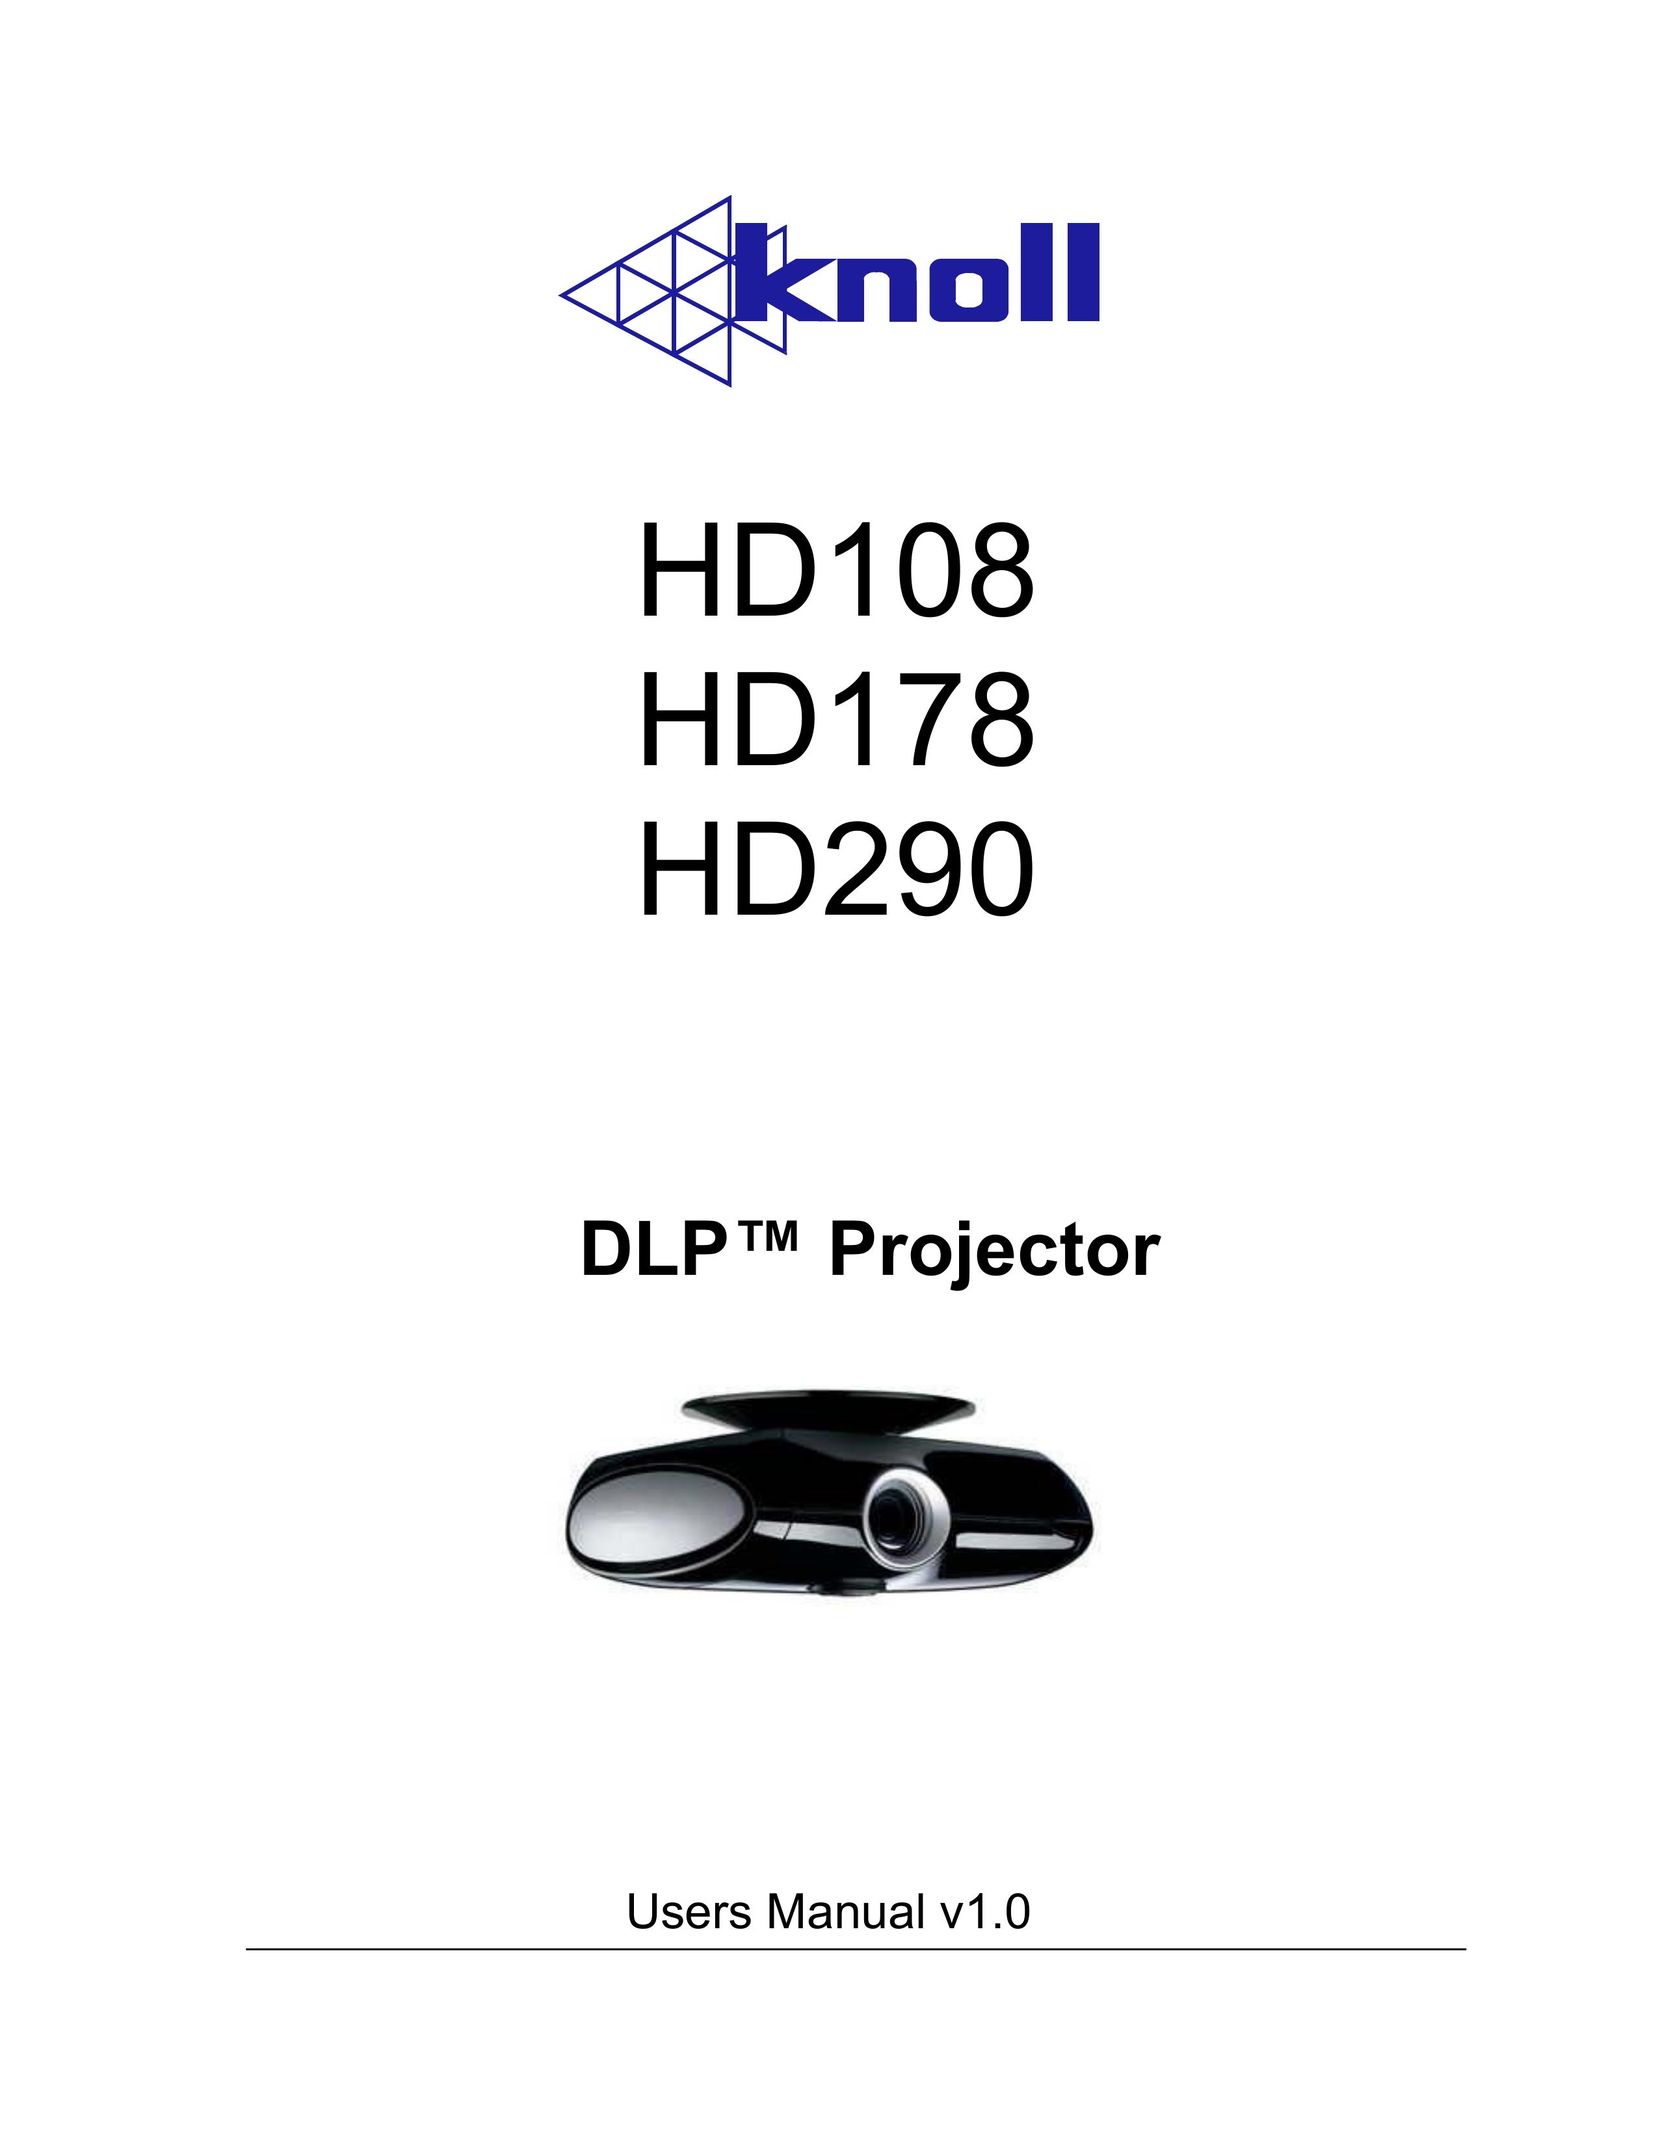 Knoll Systems HD290 Projector User Manual